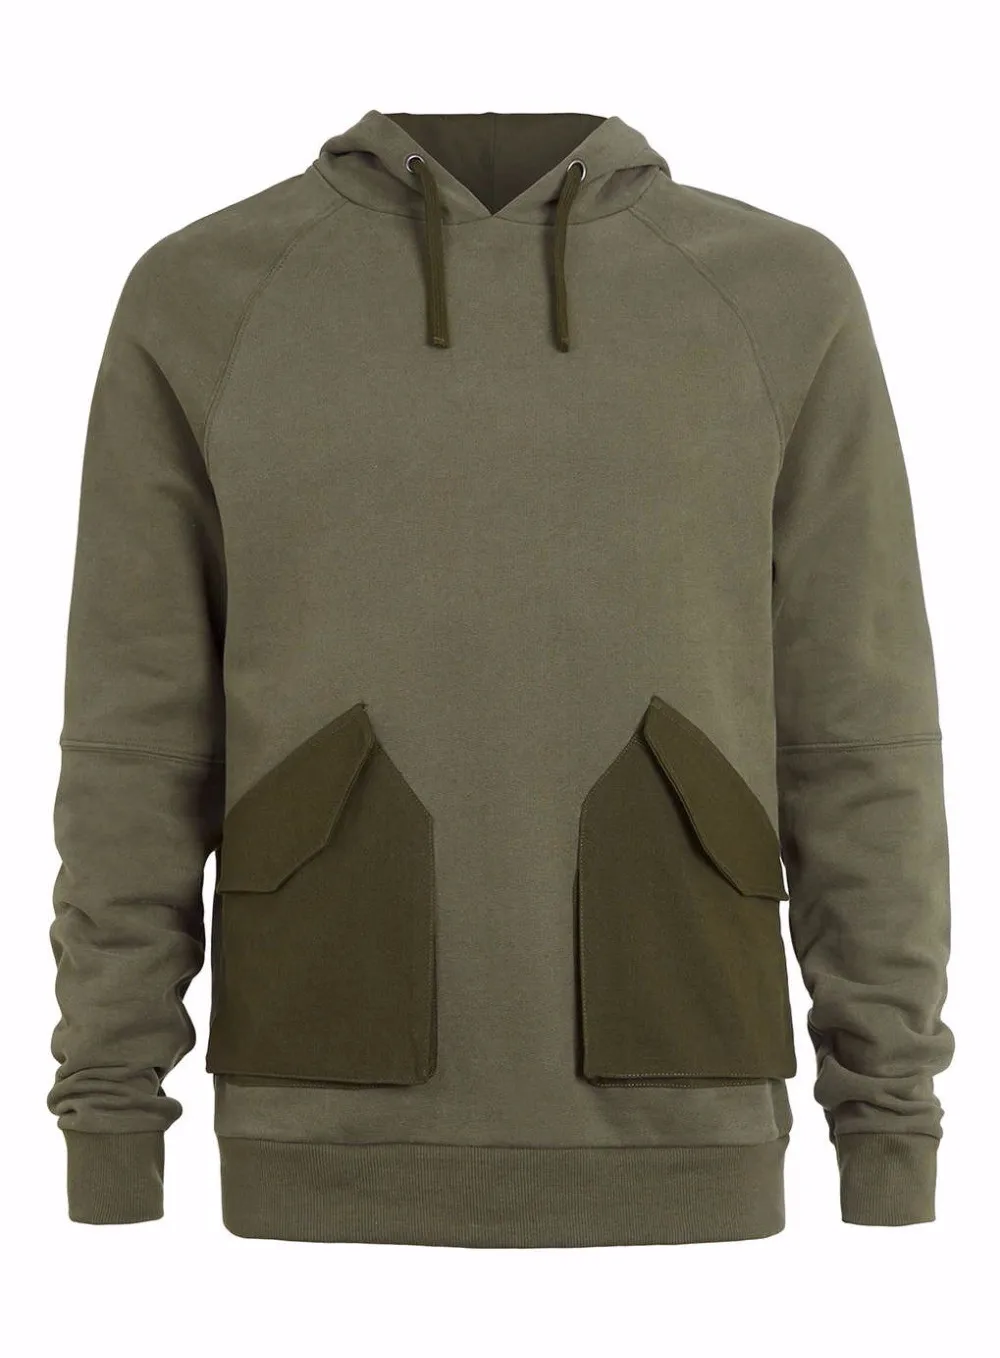 Mens Stylish Clothing Olive Green Hoodie With Pockets Custom Design